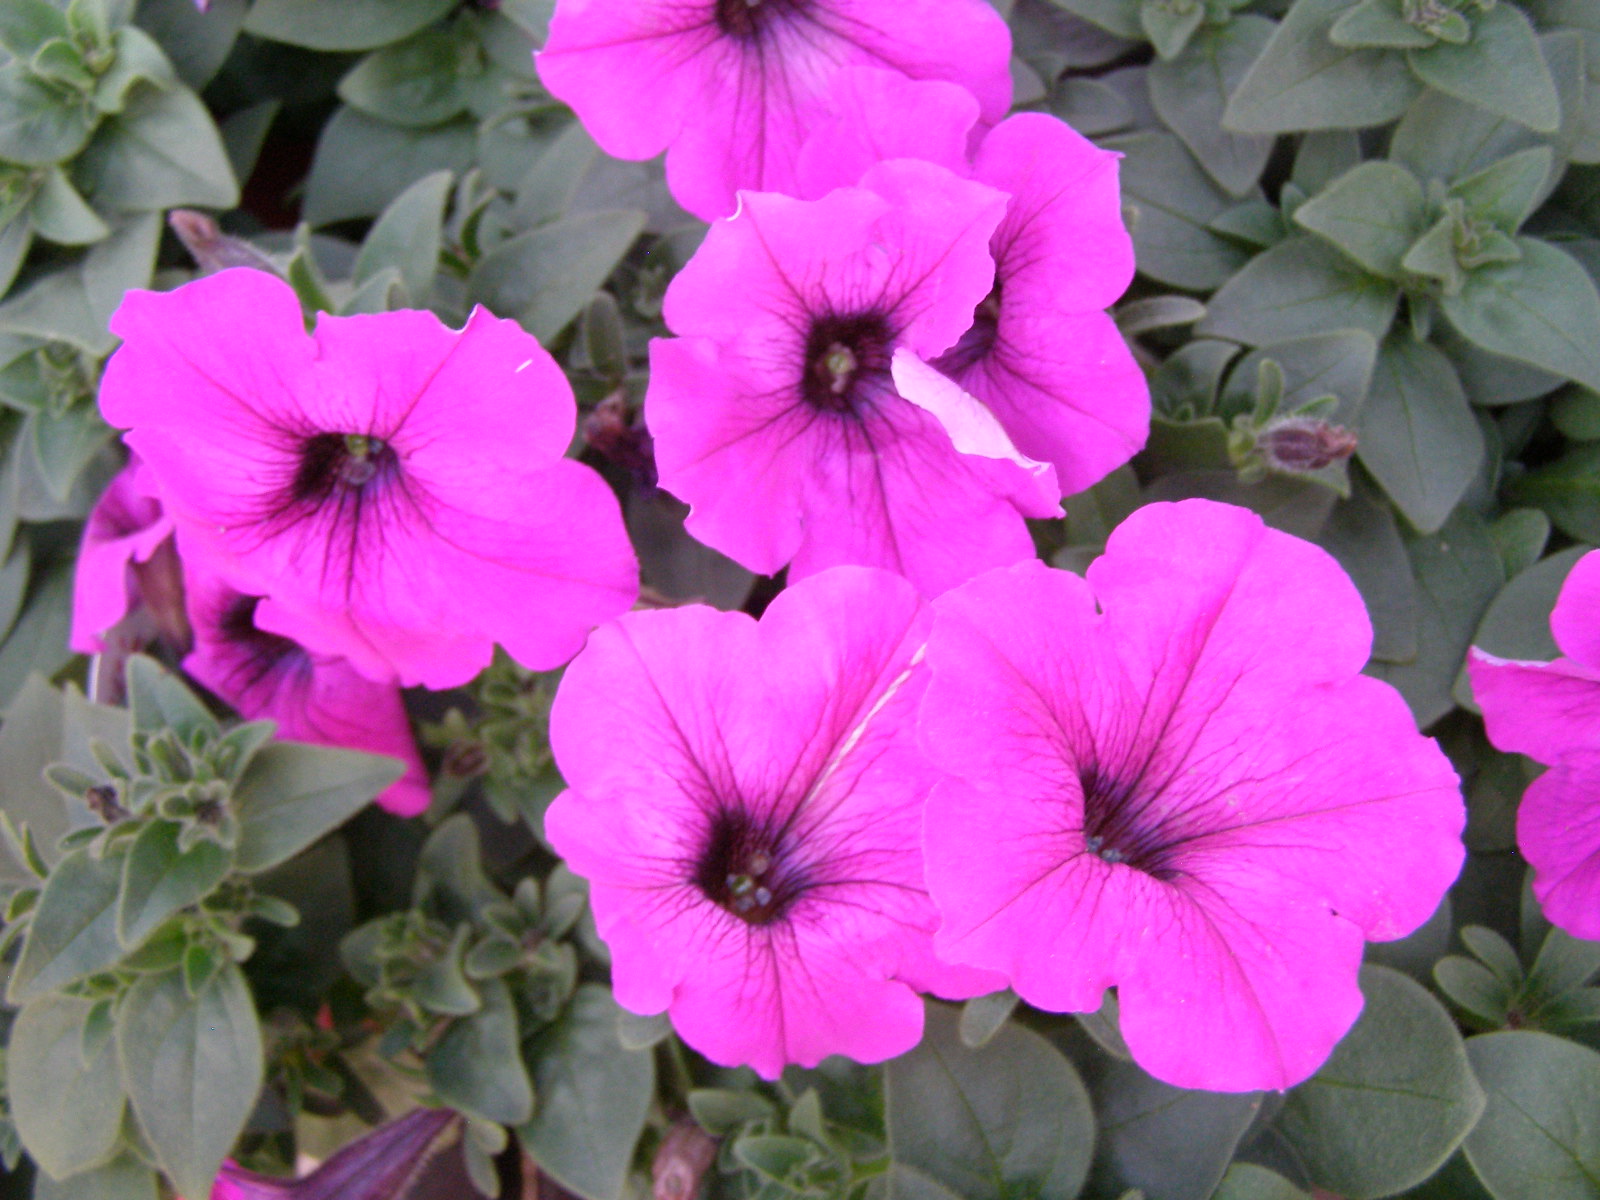  Petunias attract hummingbirds and provide them with a good source of nectar which gives them energy through the day. You can grow your own petunias in your yard or even in hanging baskets. Plant the petunias in the spring and you can watch the hummingbirds enjoy them as they fly north for breeding season.